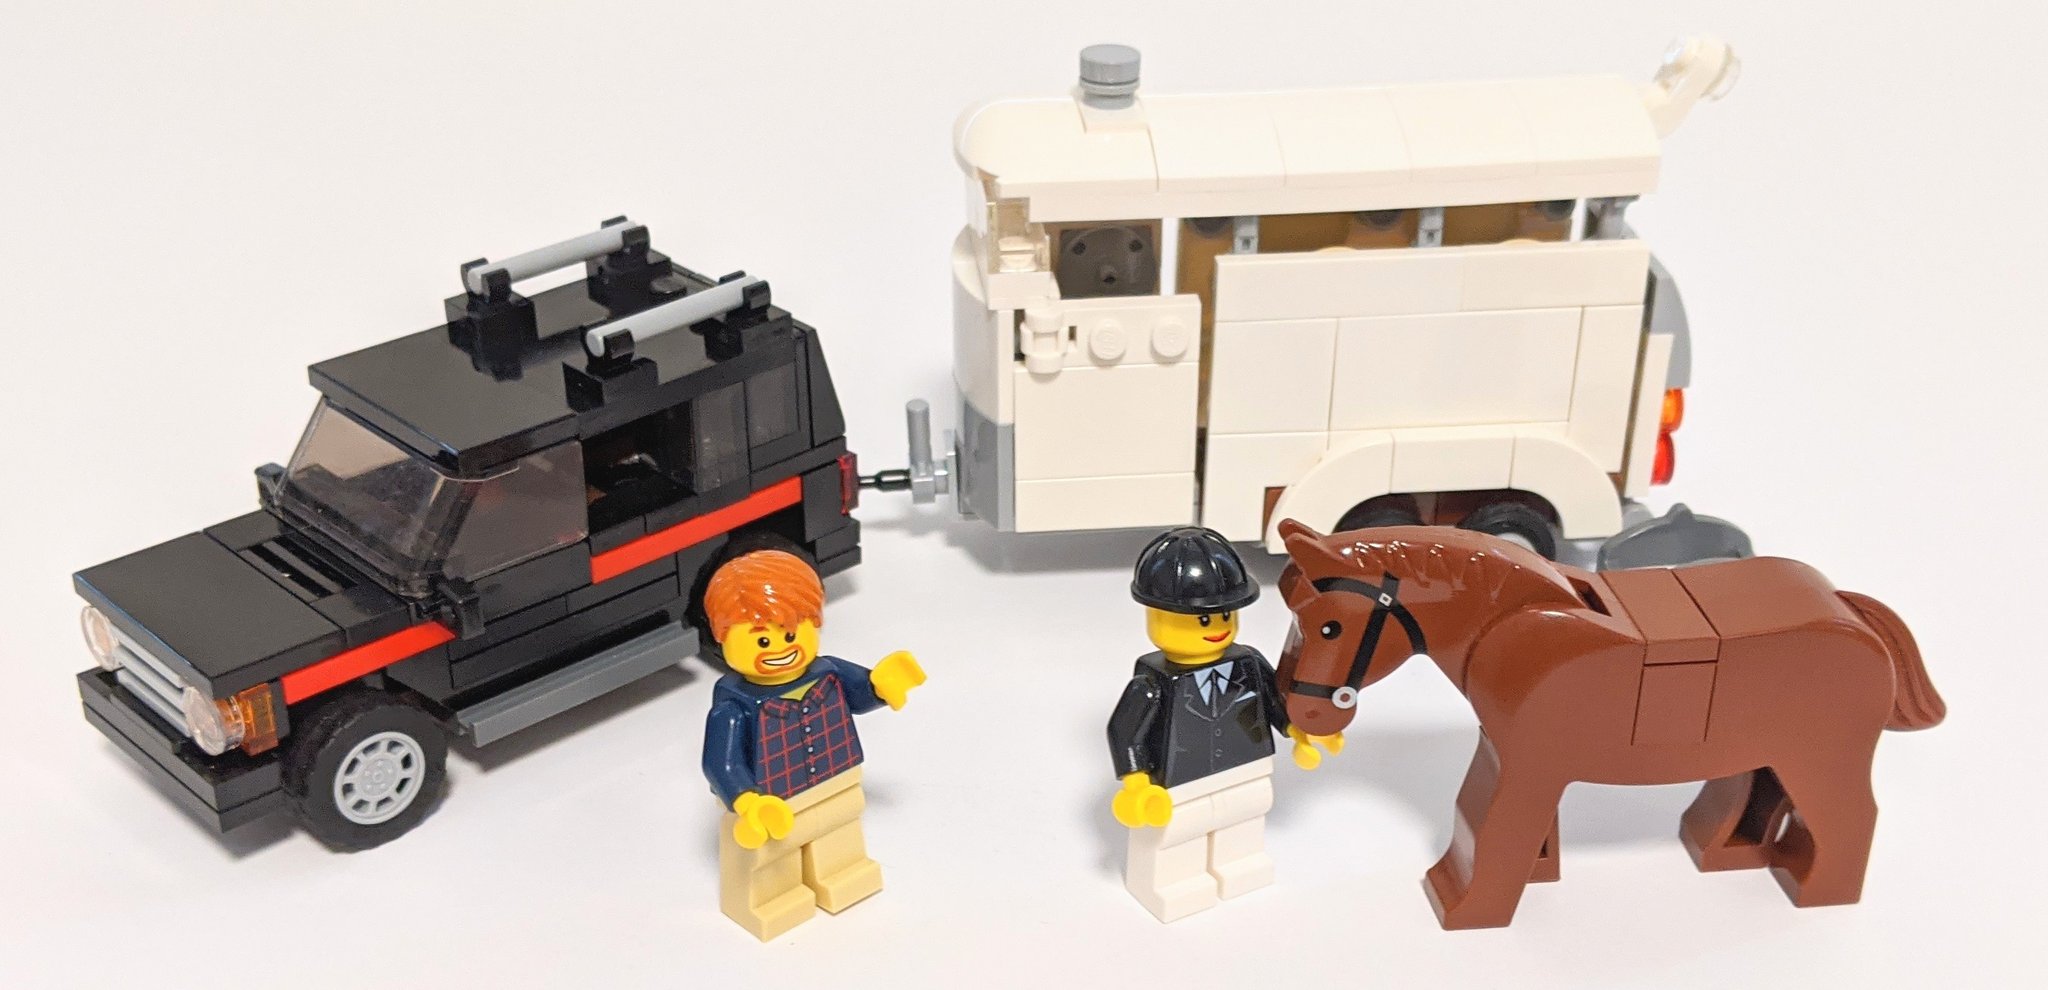 Craig Perrin Twitter: "Finished my version of 7635 4wd Horse Trailer #LEGO #MOC https://t.co/XuUBUYH4iM" / Twitter